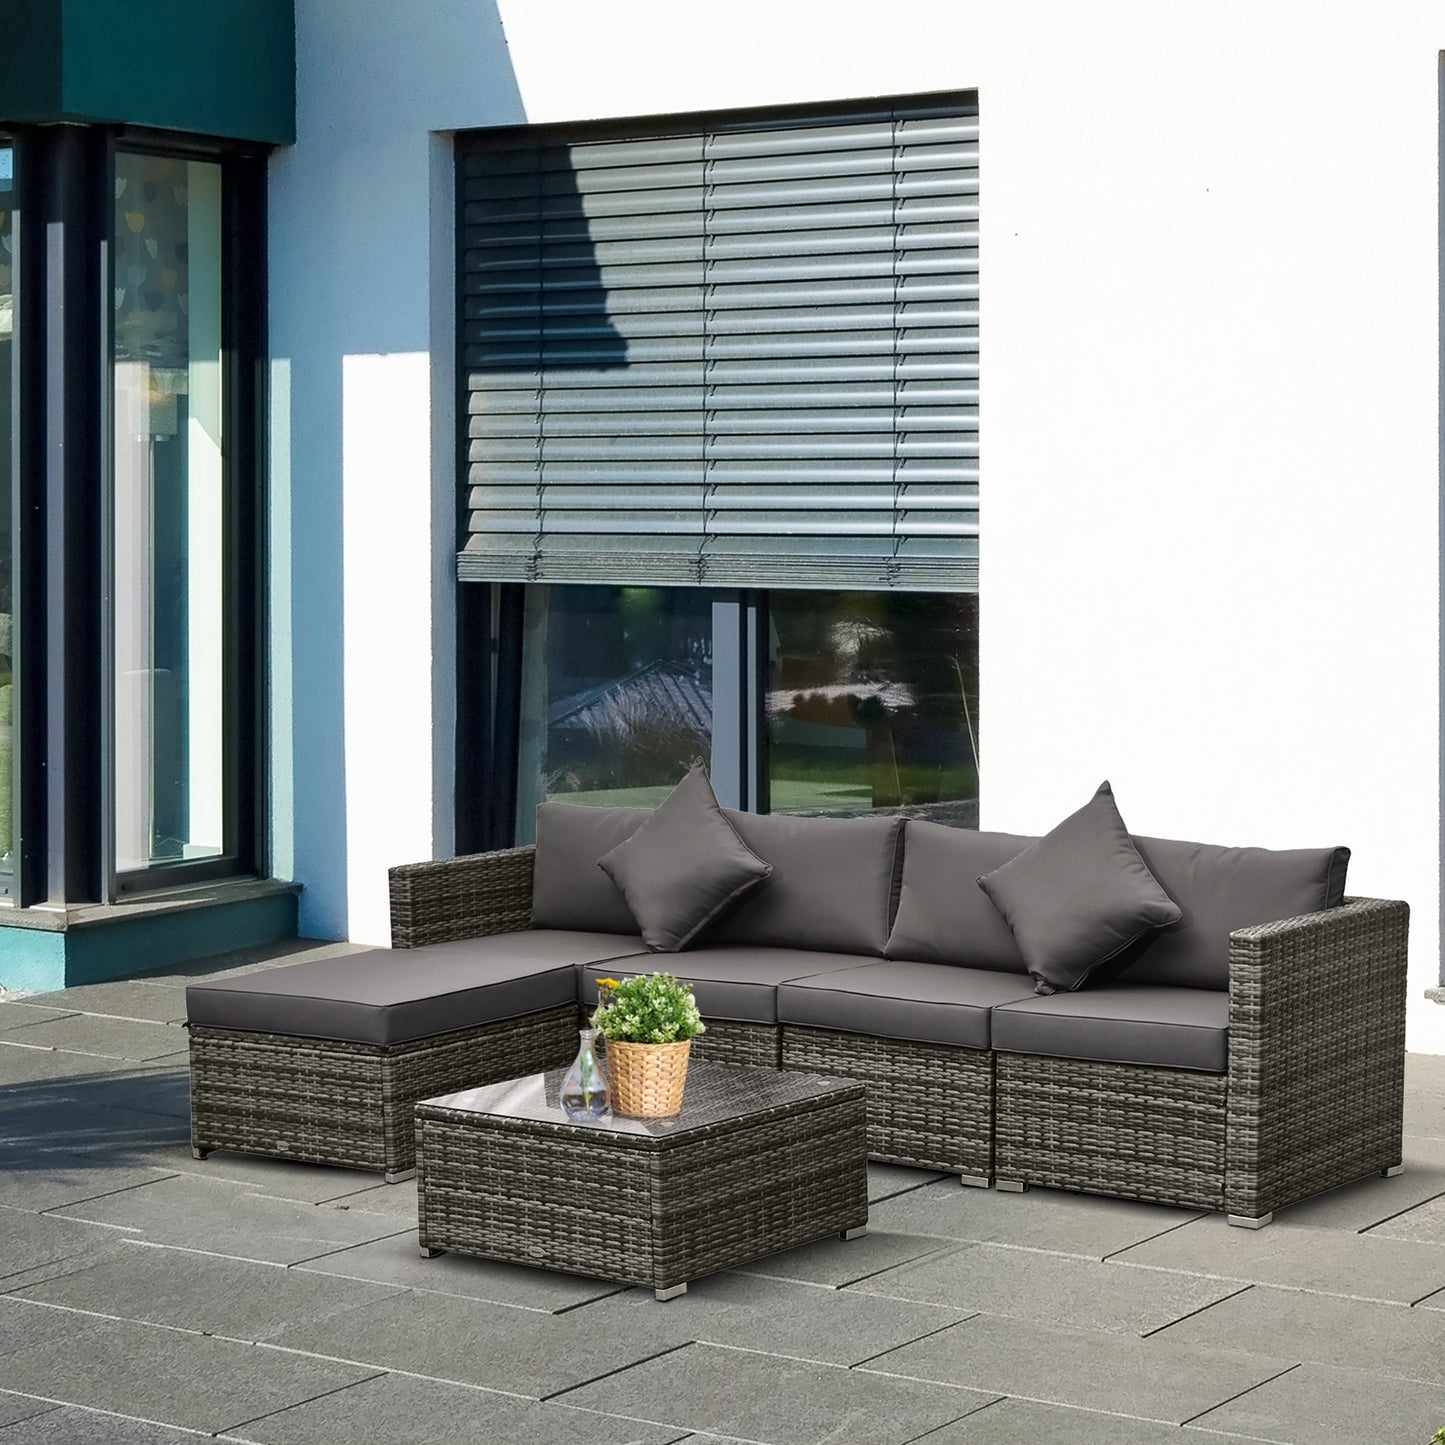 Outsunny 5-Seater Garden Patio Rattan Furniture Wicker Weave Conservatory Sofa Chairs Table Set Brown Aluminium Frame